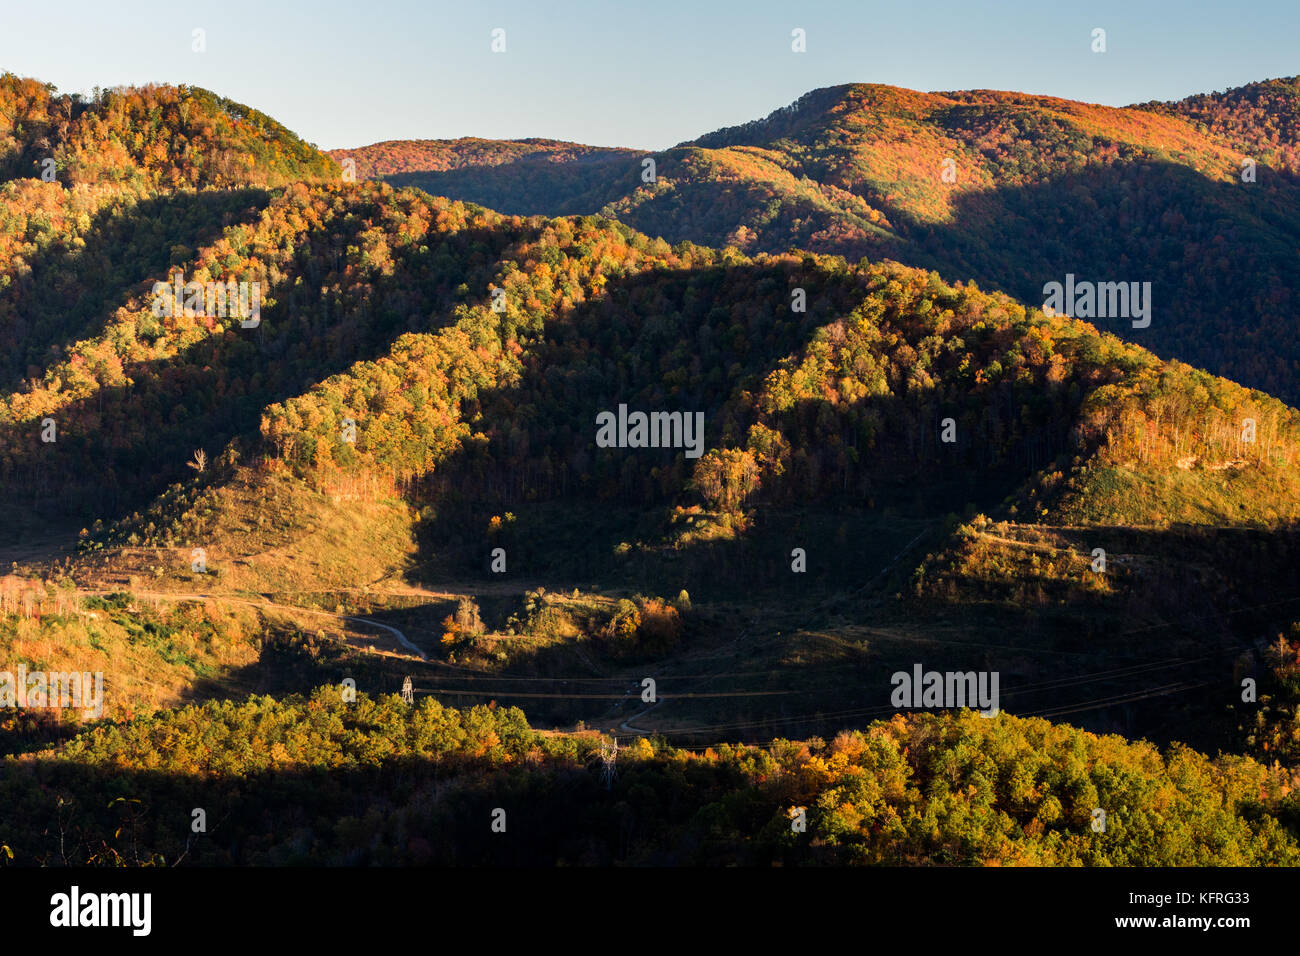 The sun is low in the sky on a mountain during the autumn months. Stock Photo